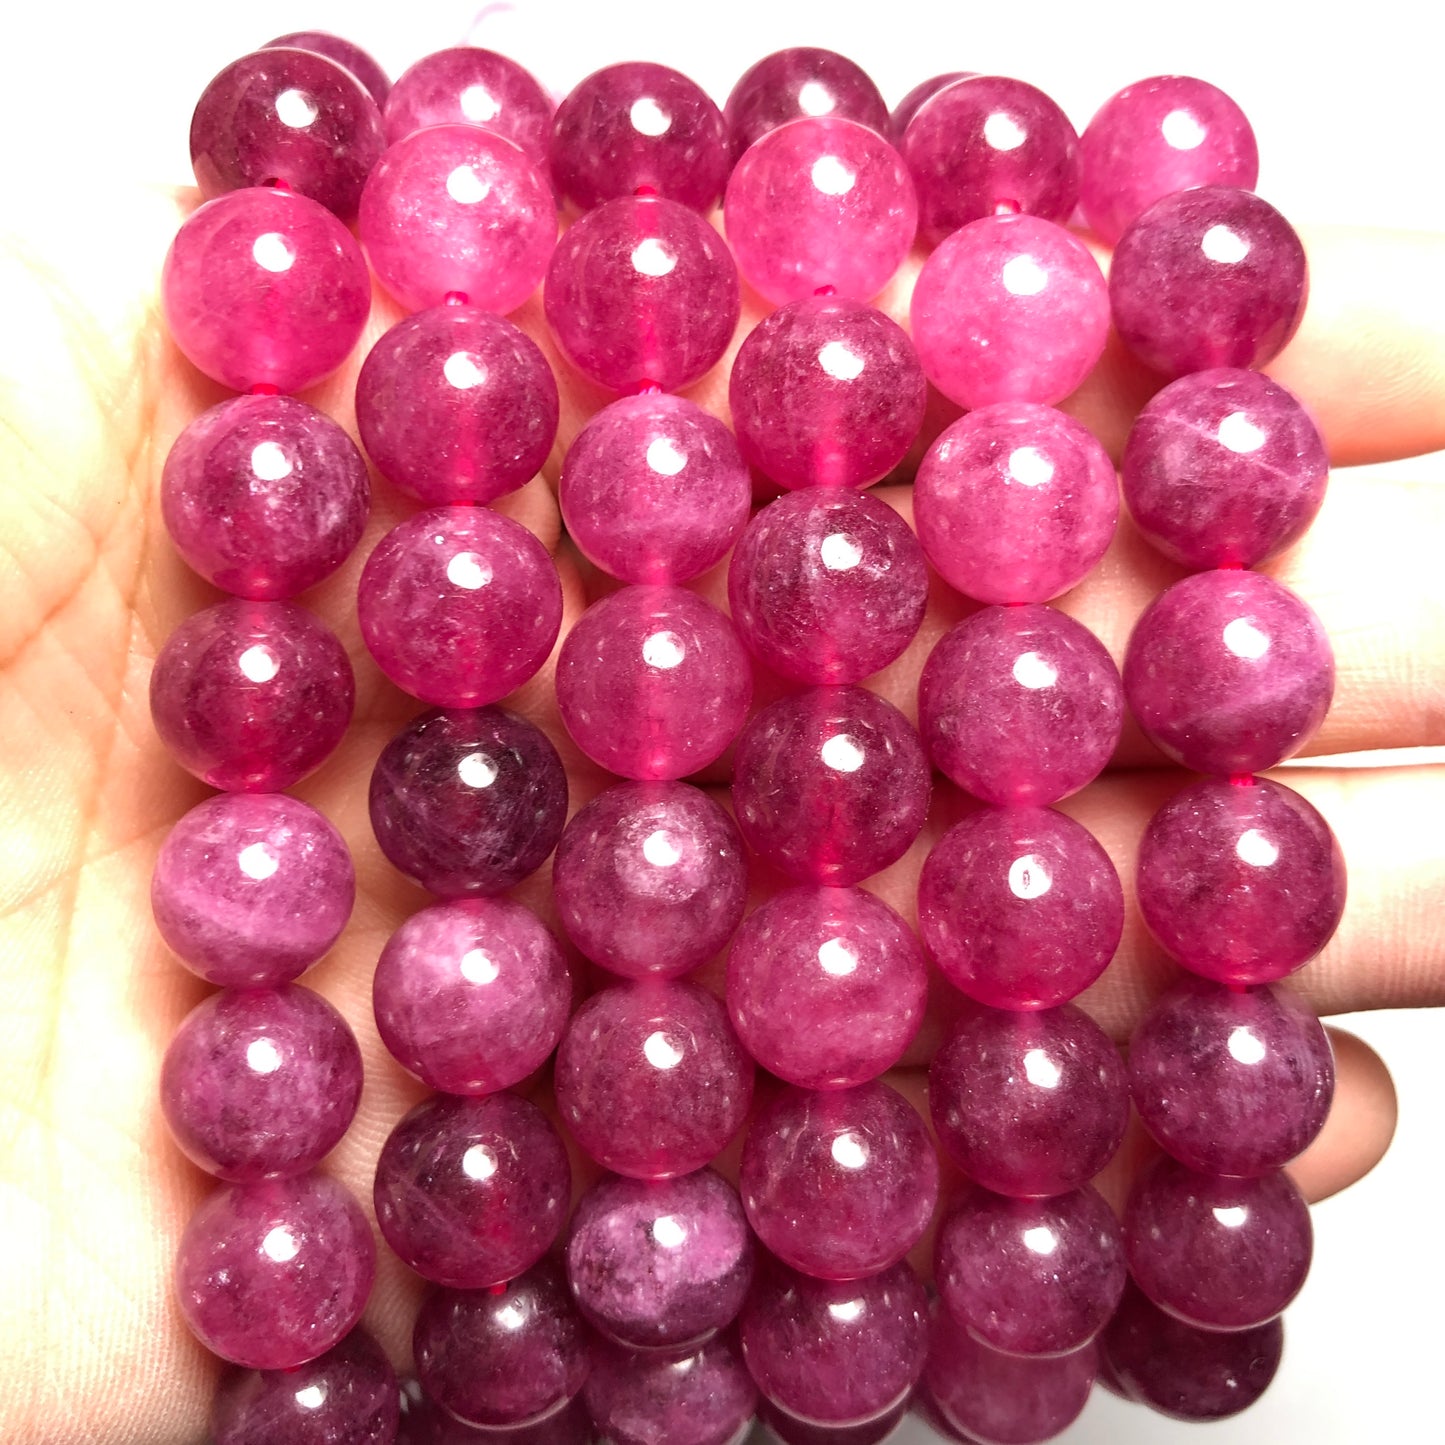 2 Strands/lot 10mm Pink Tourmaline Stone Round Beads Stone Beads Breast Cancer Awareness New Beads Arrivals Other Stone Beads Charms Beads Beyond